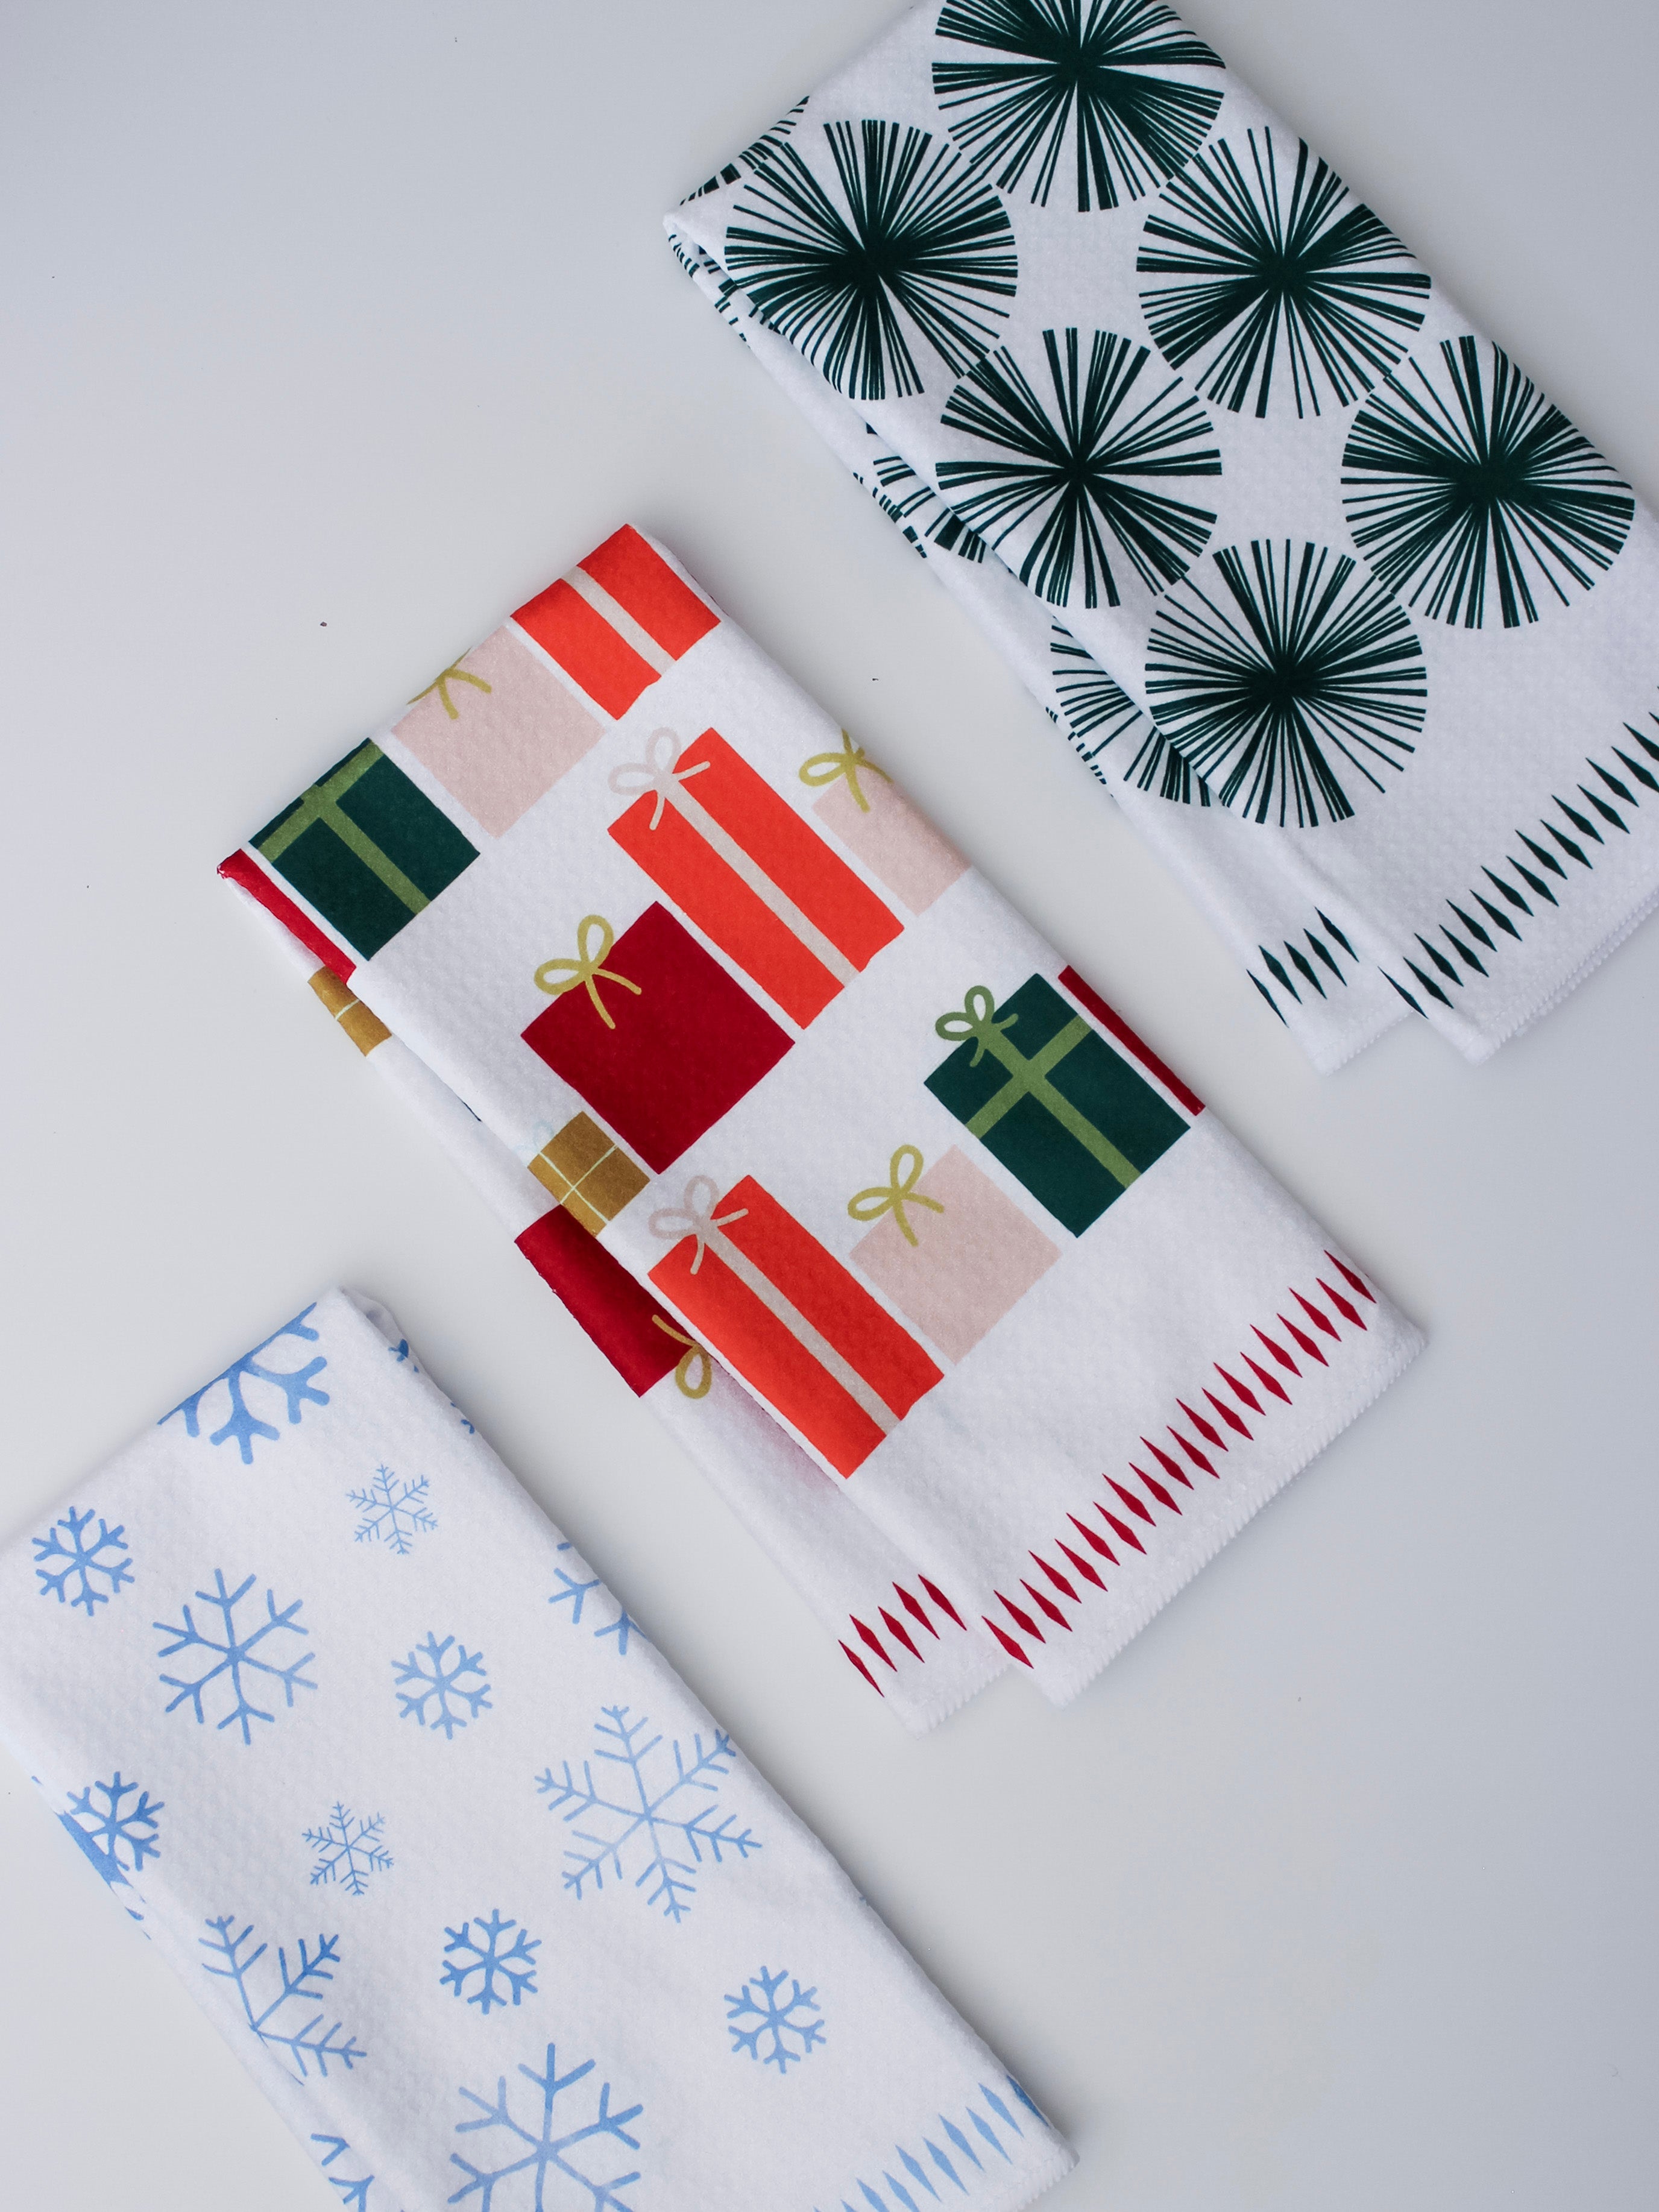 Have a Holly Jolly Christmas Kitchen Towel